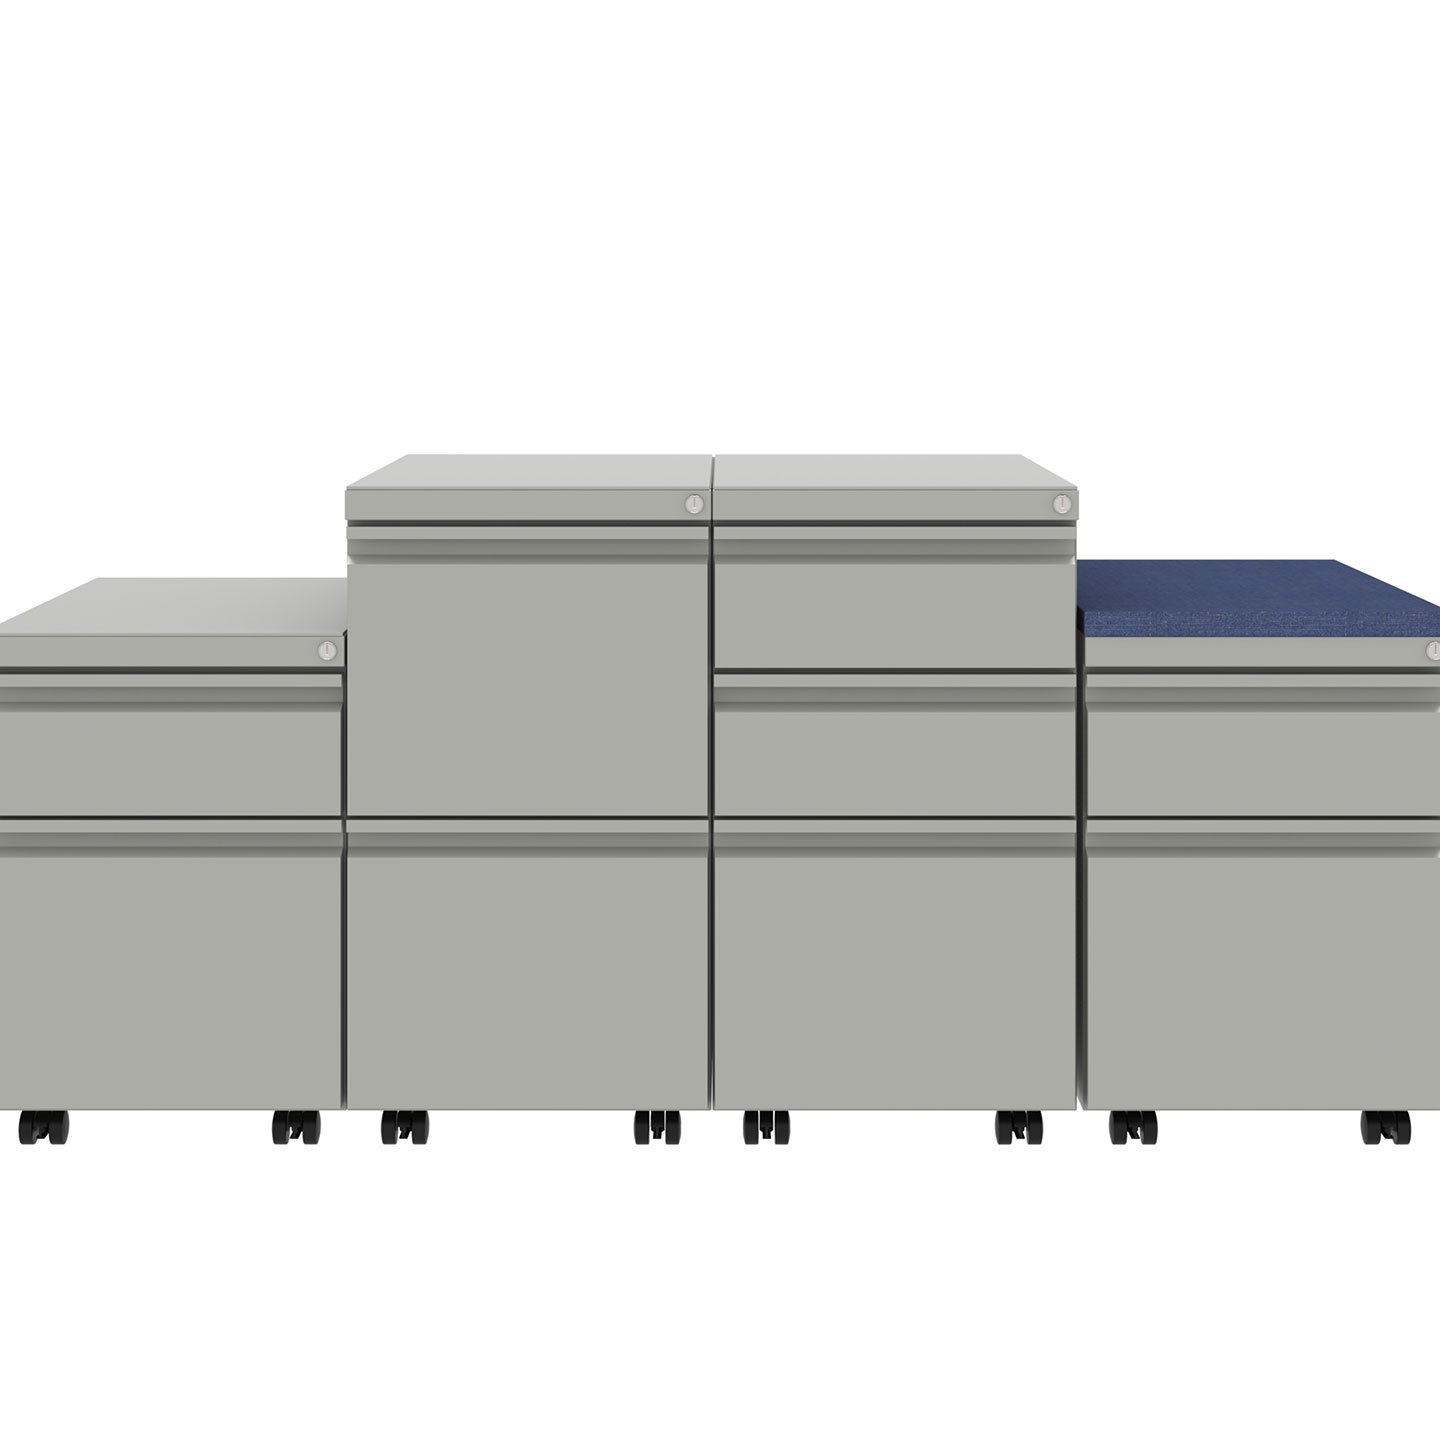 V Series pedestals in gray with locking and file drawers.  